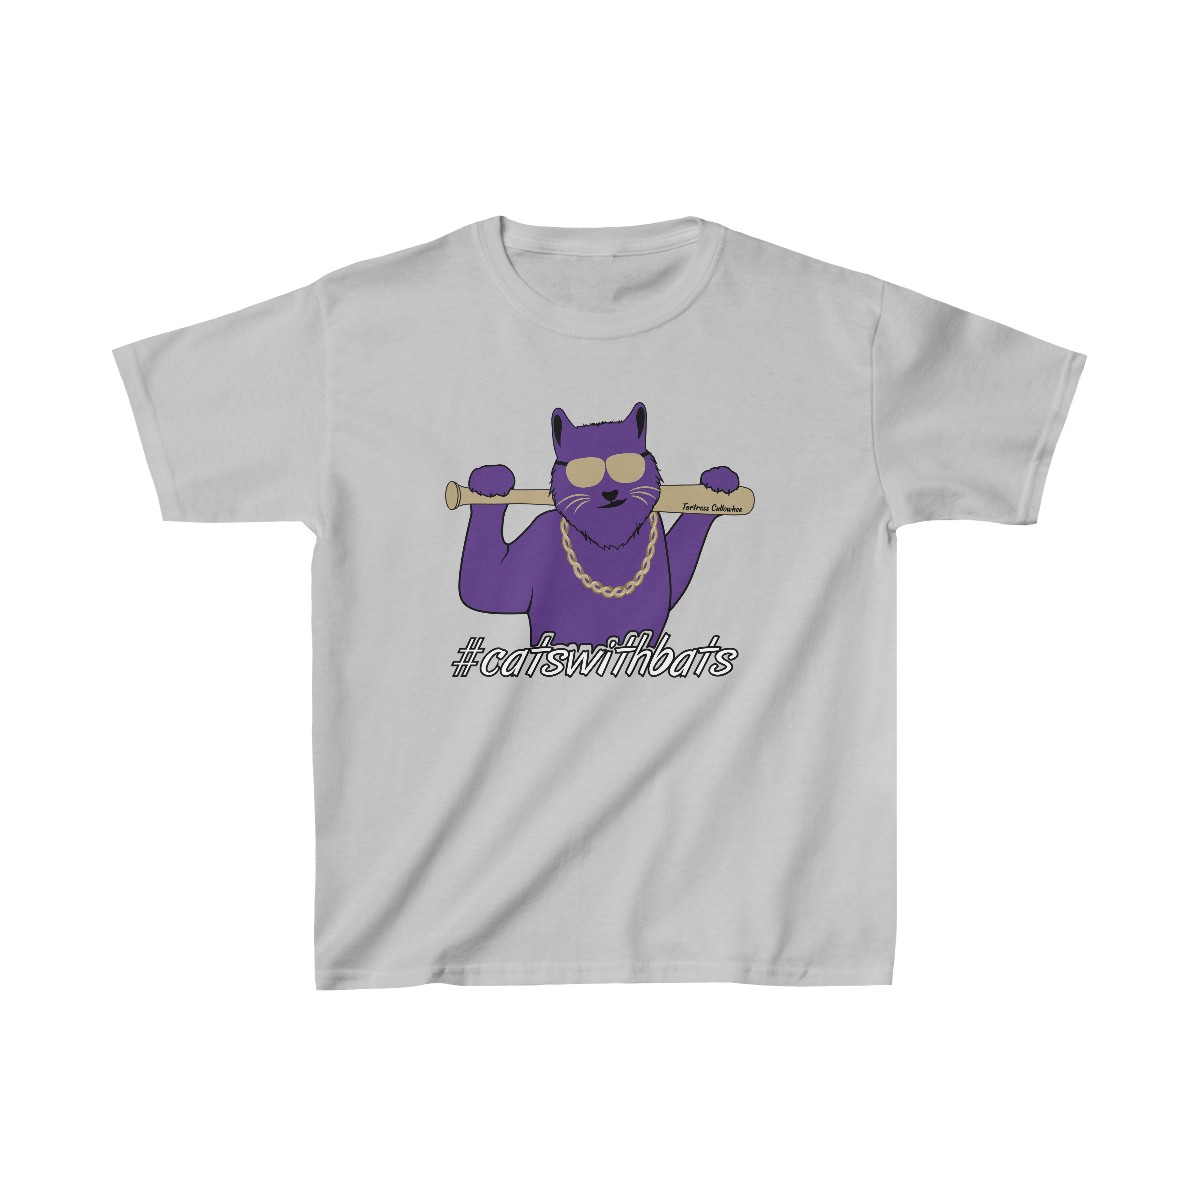 Kids - Cats with Bats (many colors) product thumbnail image